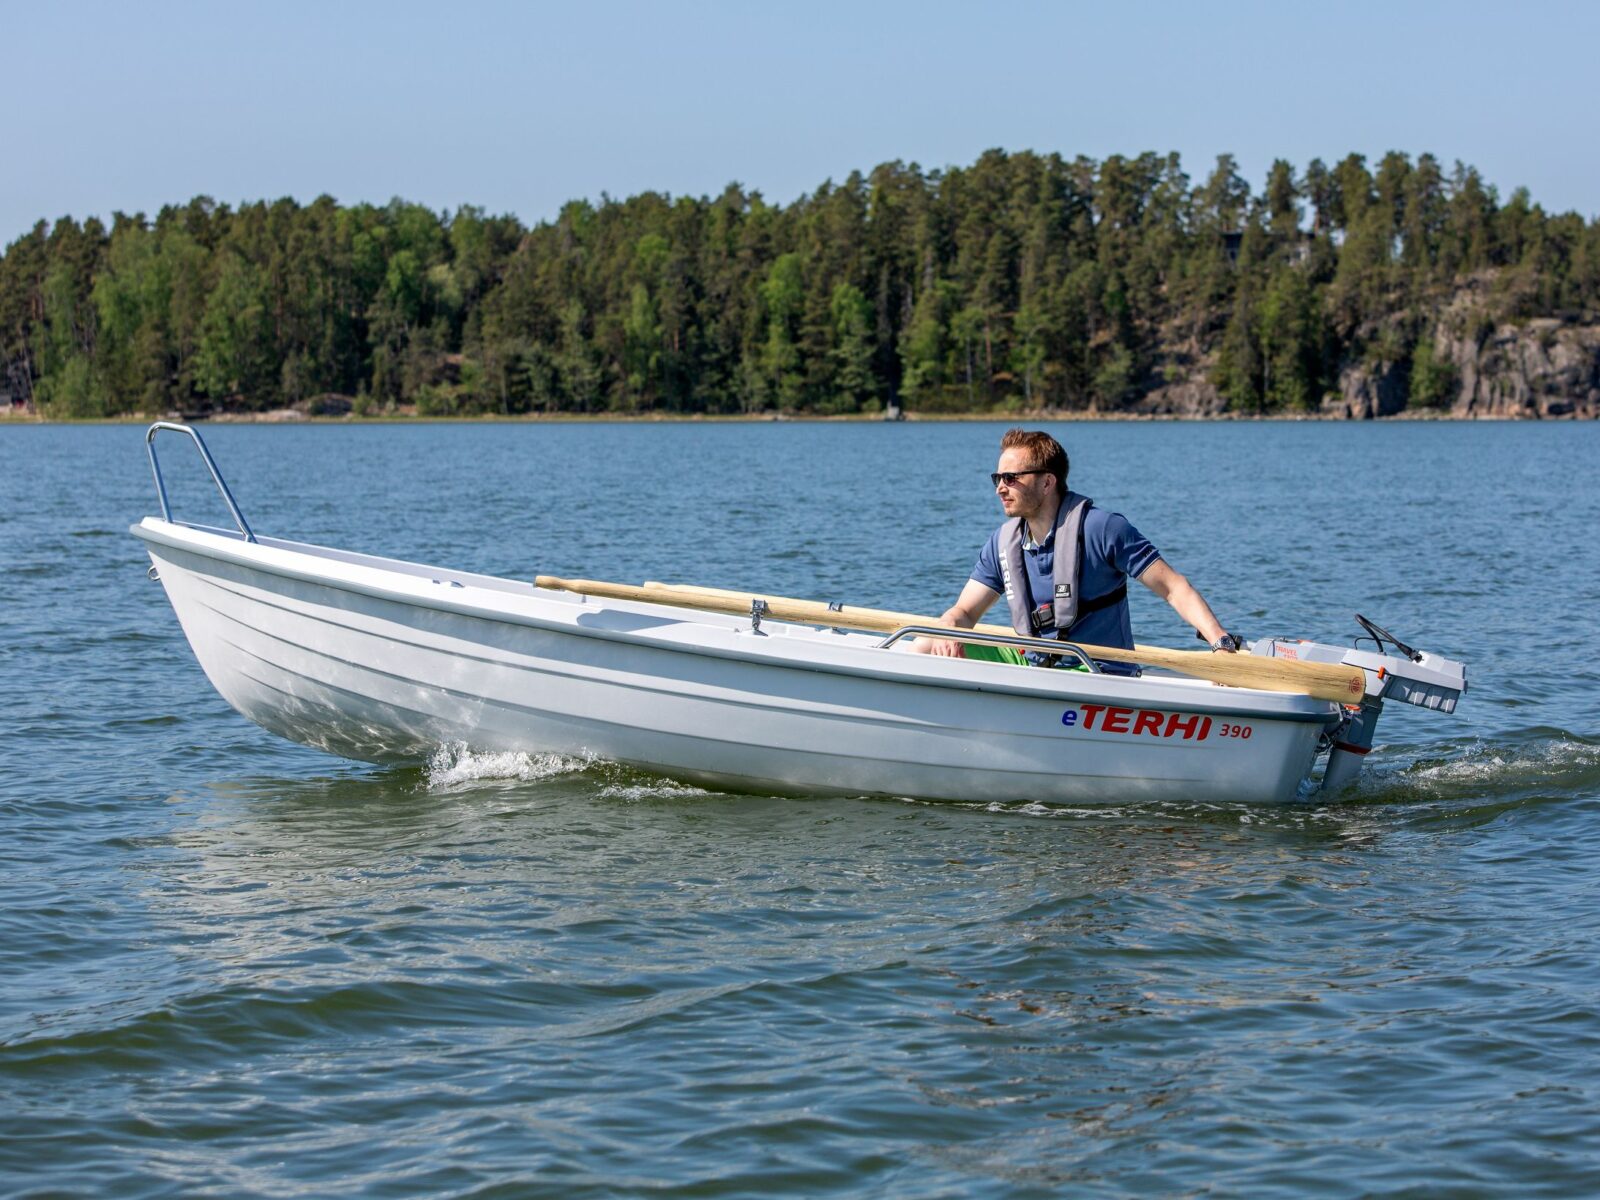 Terhi-390-1-boat-solutions-utting-am-ammersee.jpg